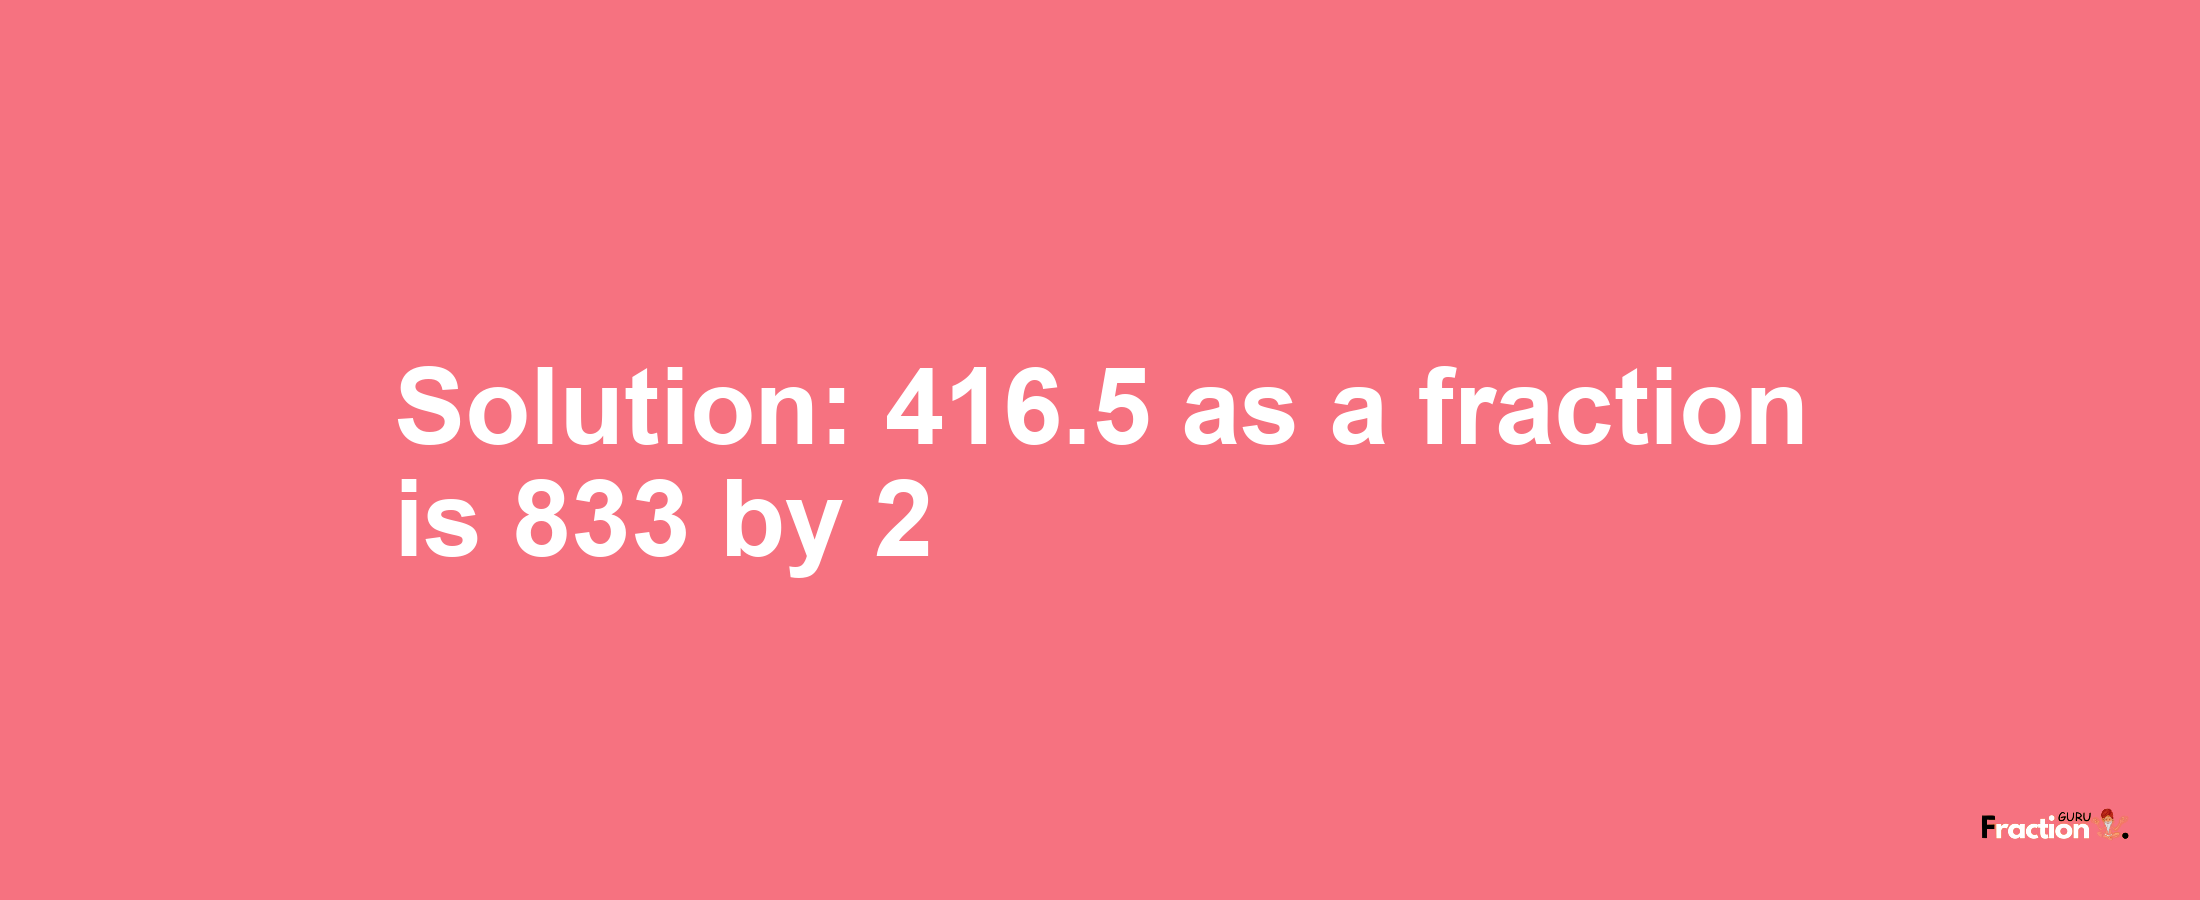 Solution:416.5 as a fraction is 833/2